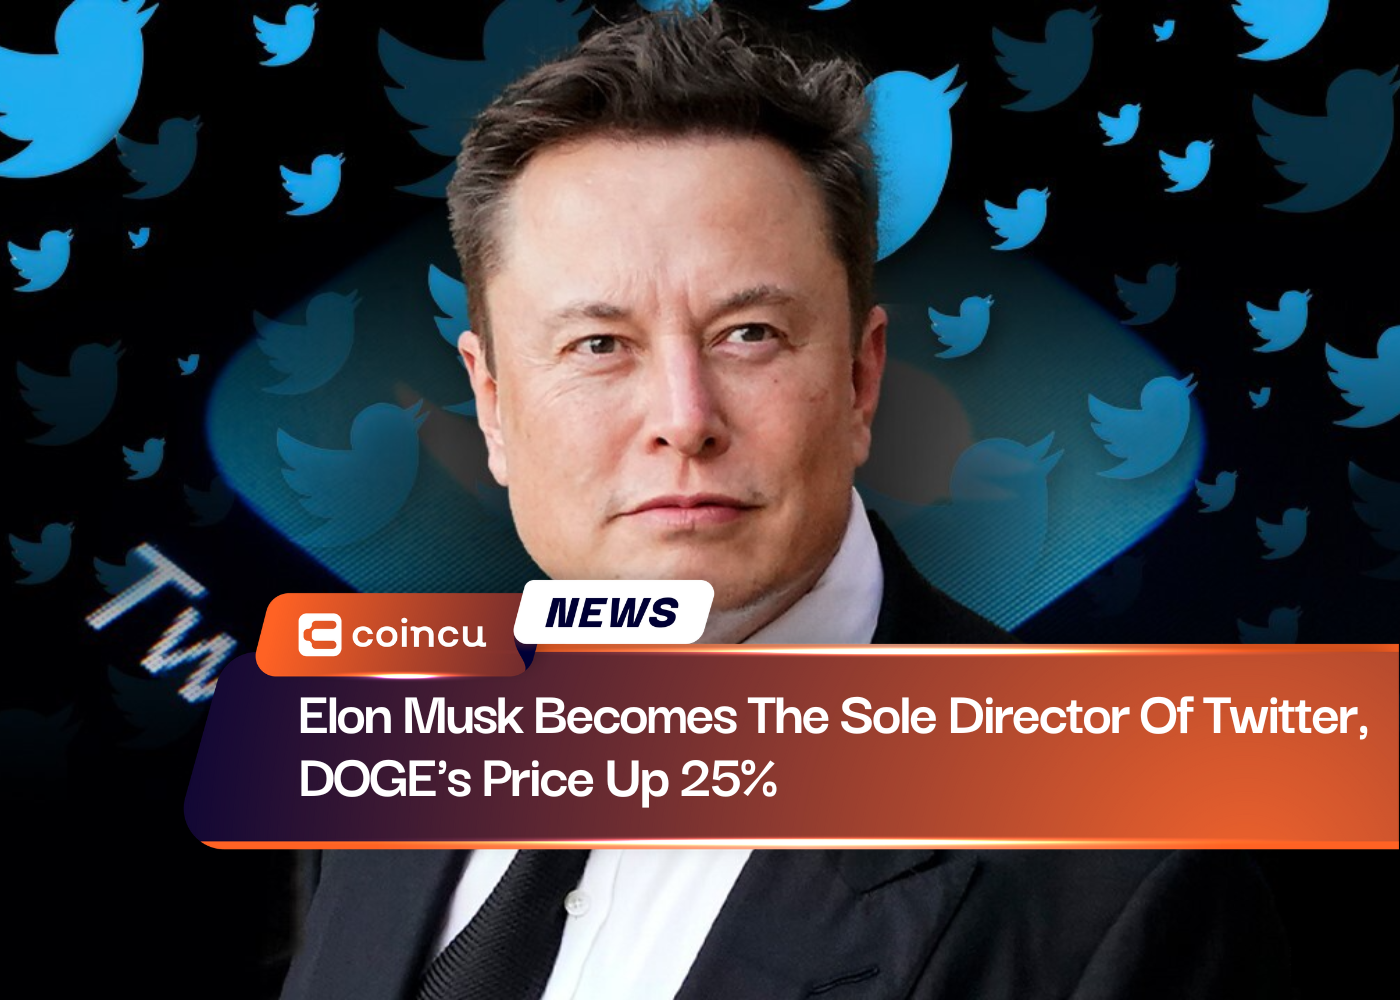 Elon Musk Becomes The Sole Director Of Twitter, DOGE's Price Up 25%